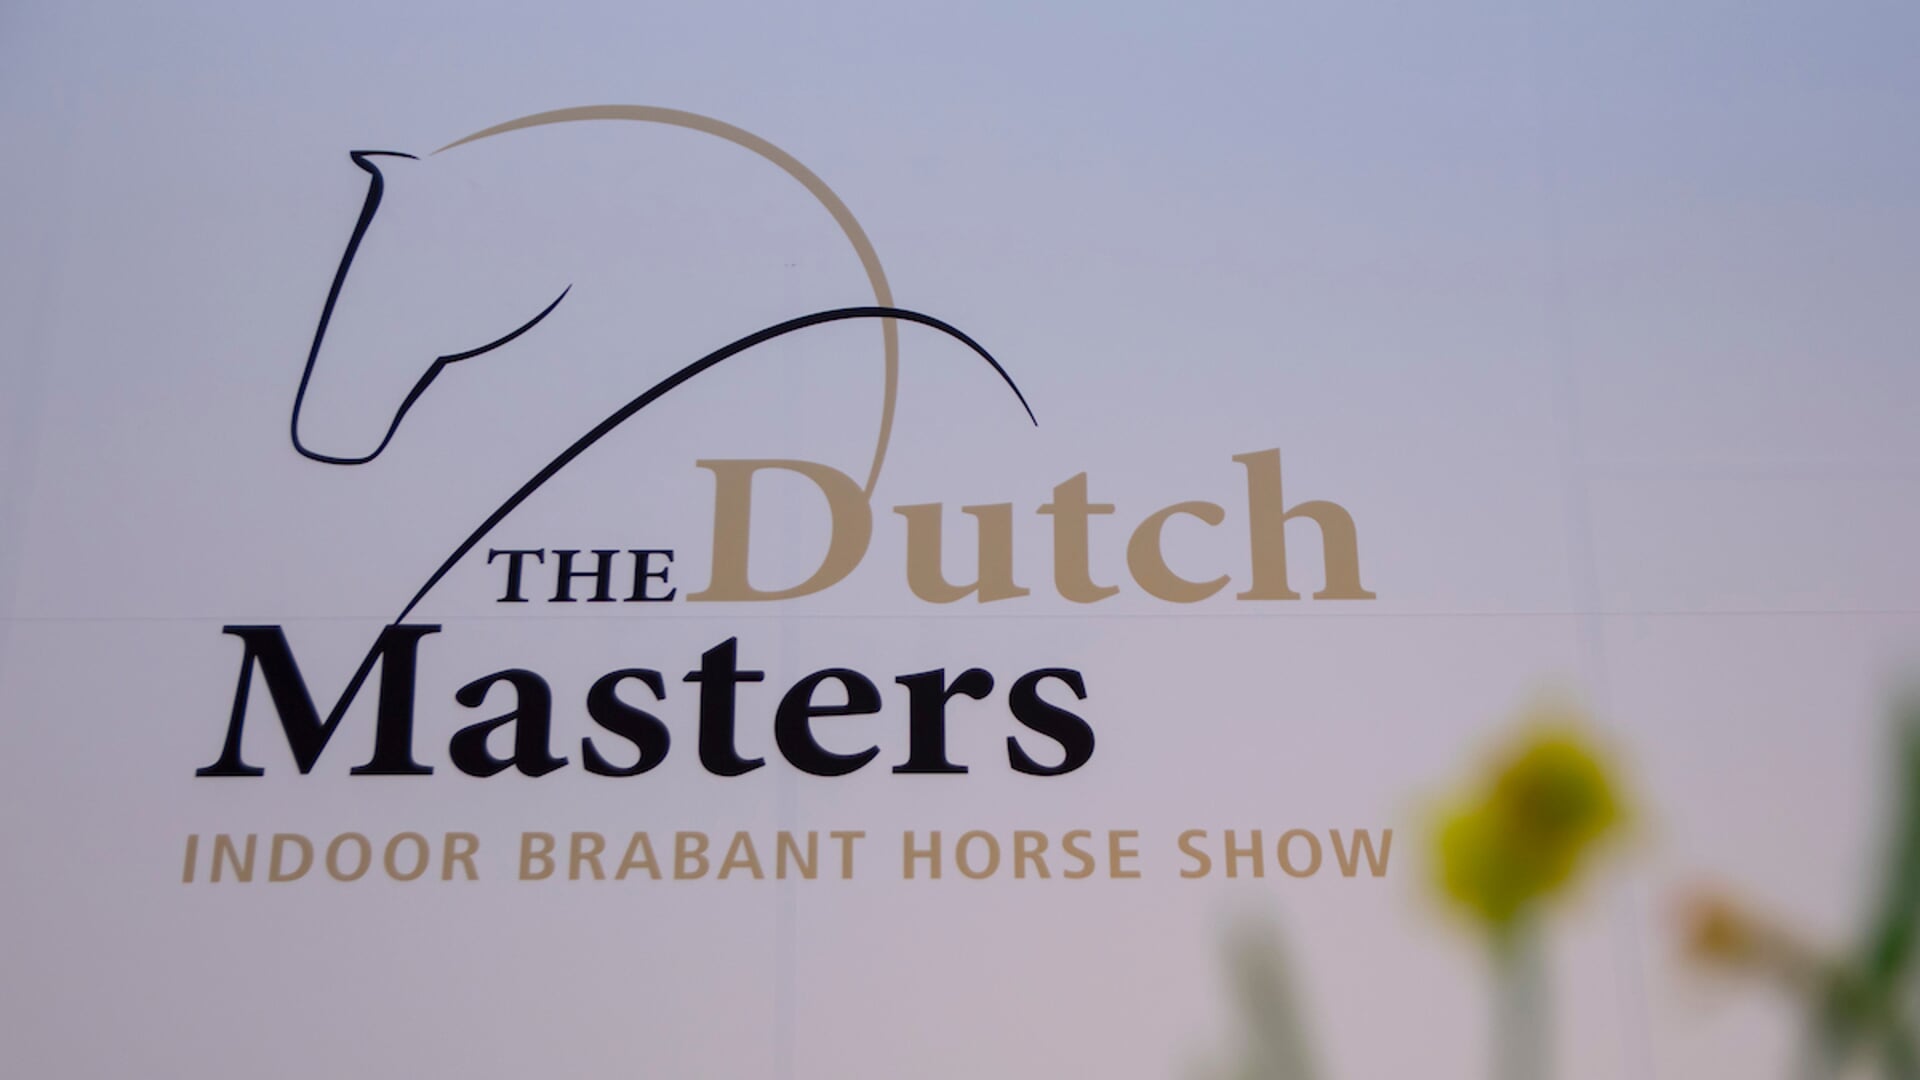 The Dutch Masters